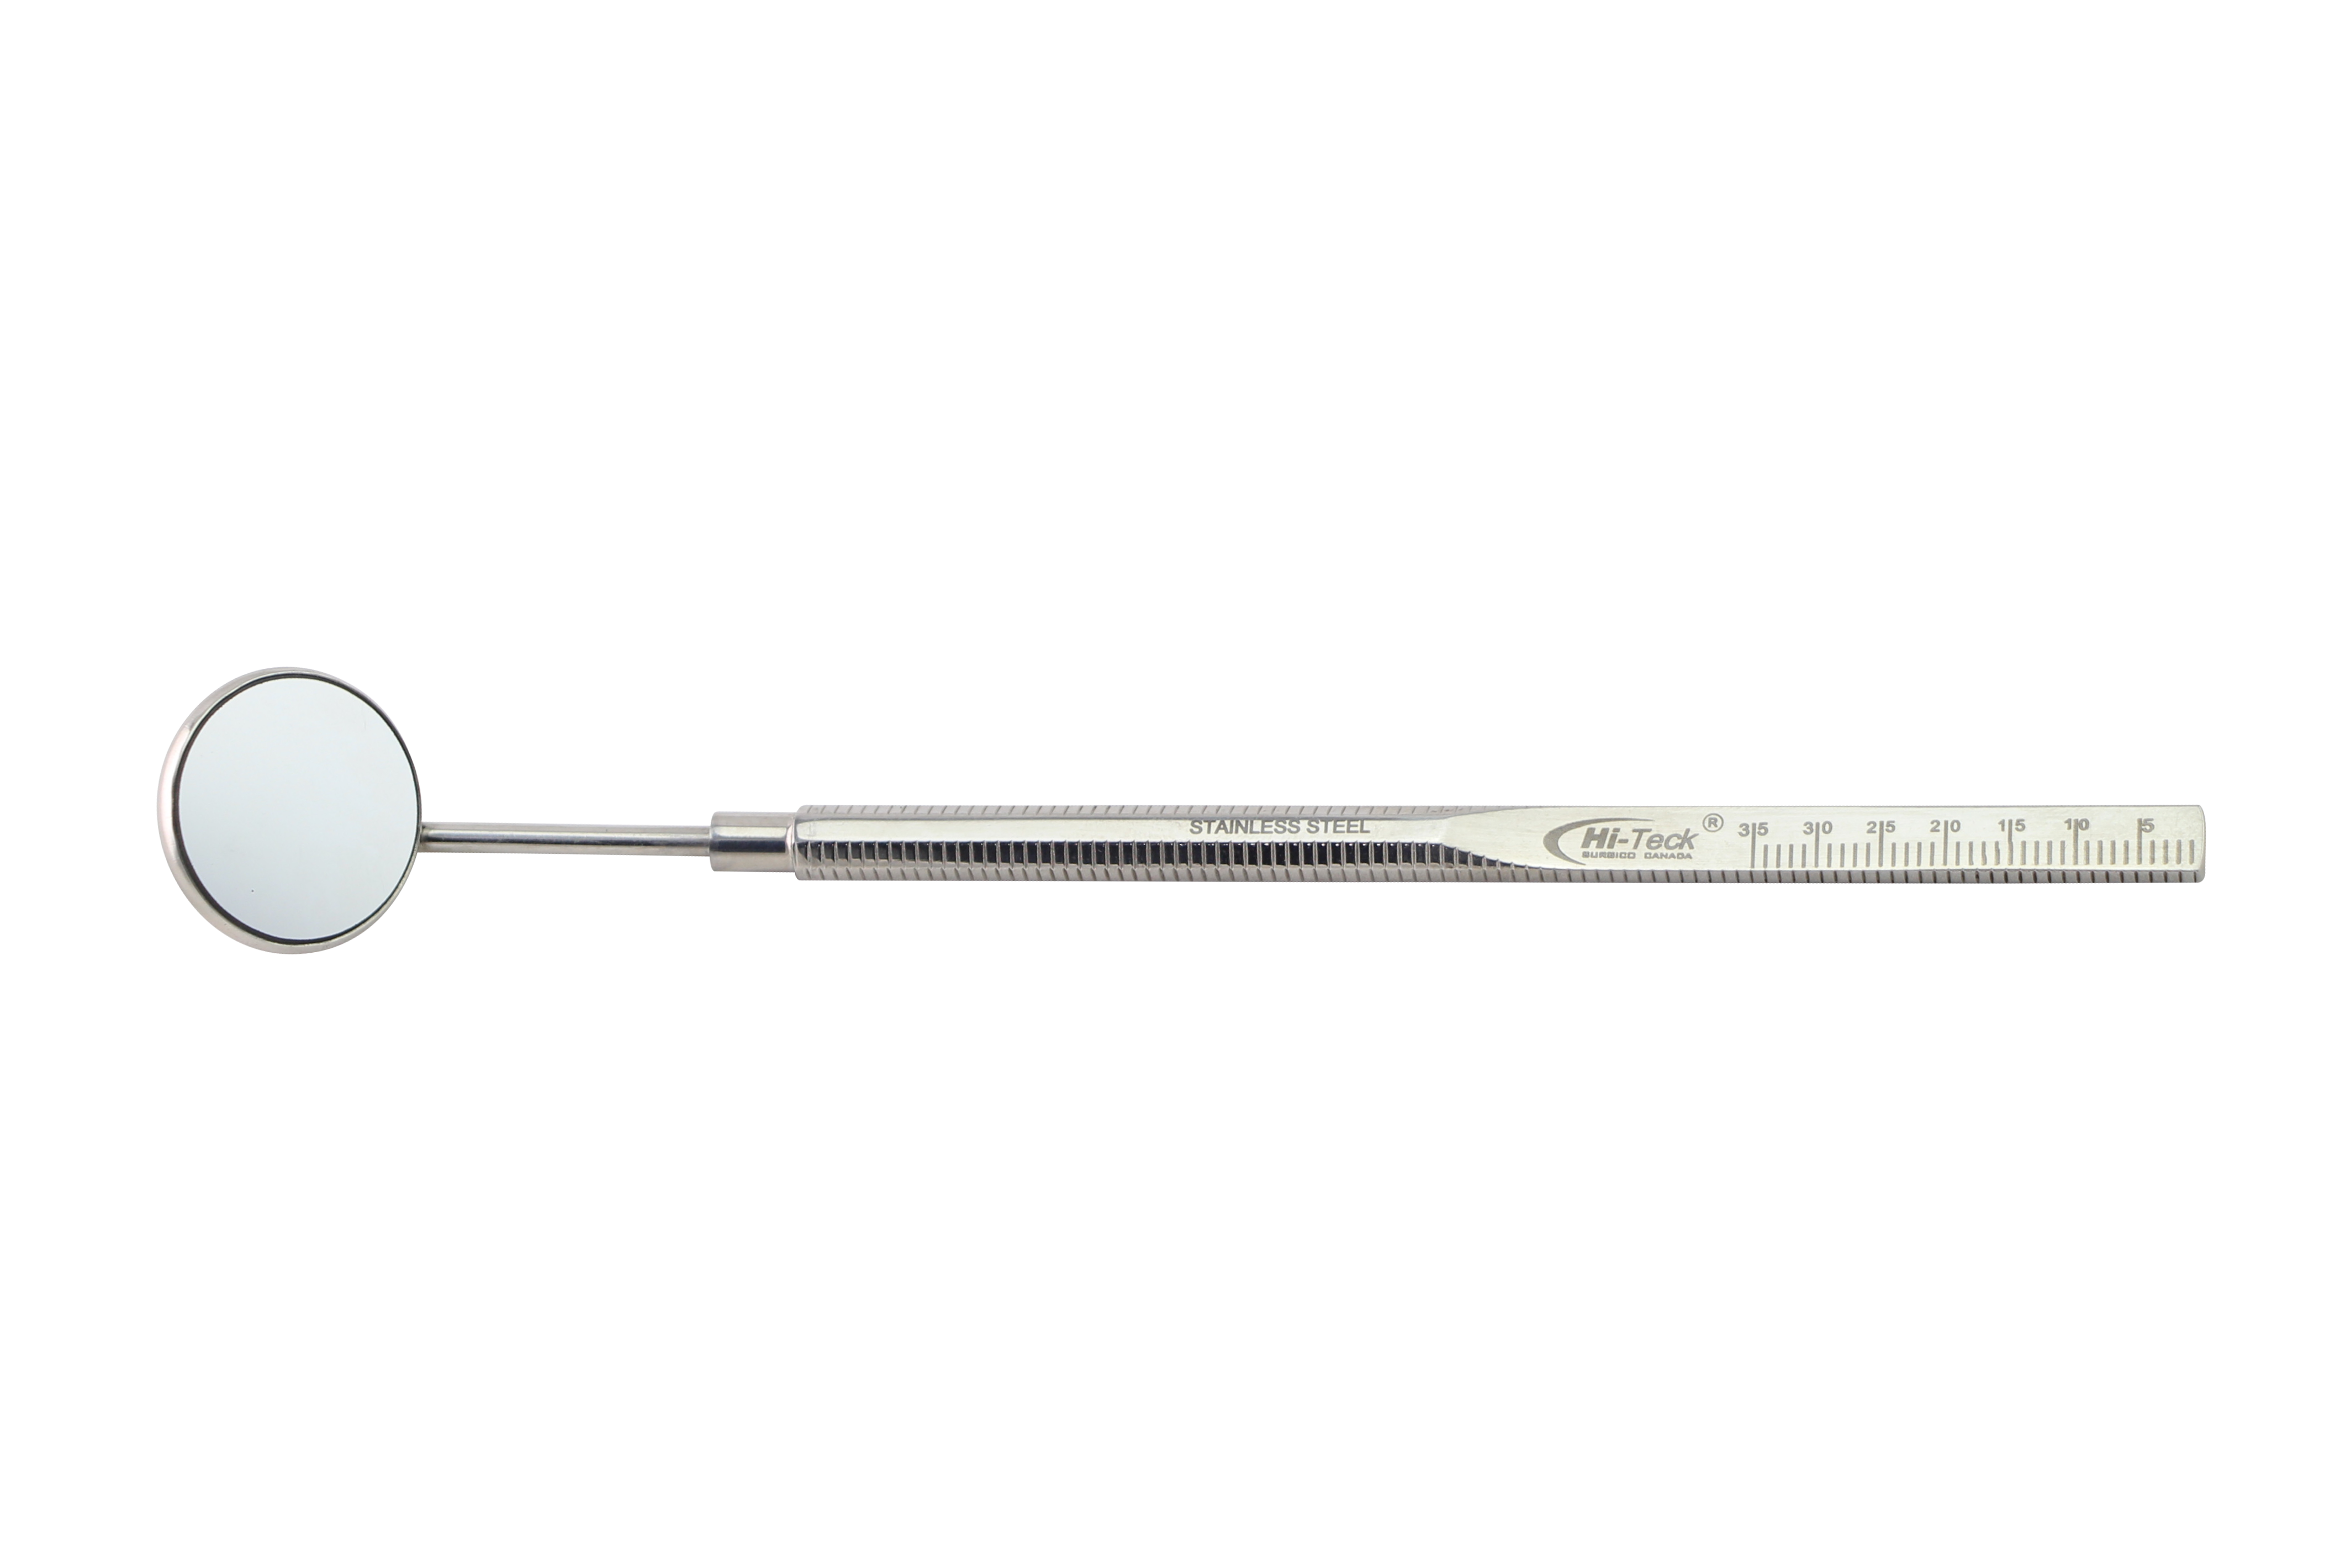 Solid Hexagon Mirror Handle, Simple Stem, With Measuring Scale - HiTeck Medical Instruments